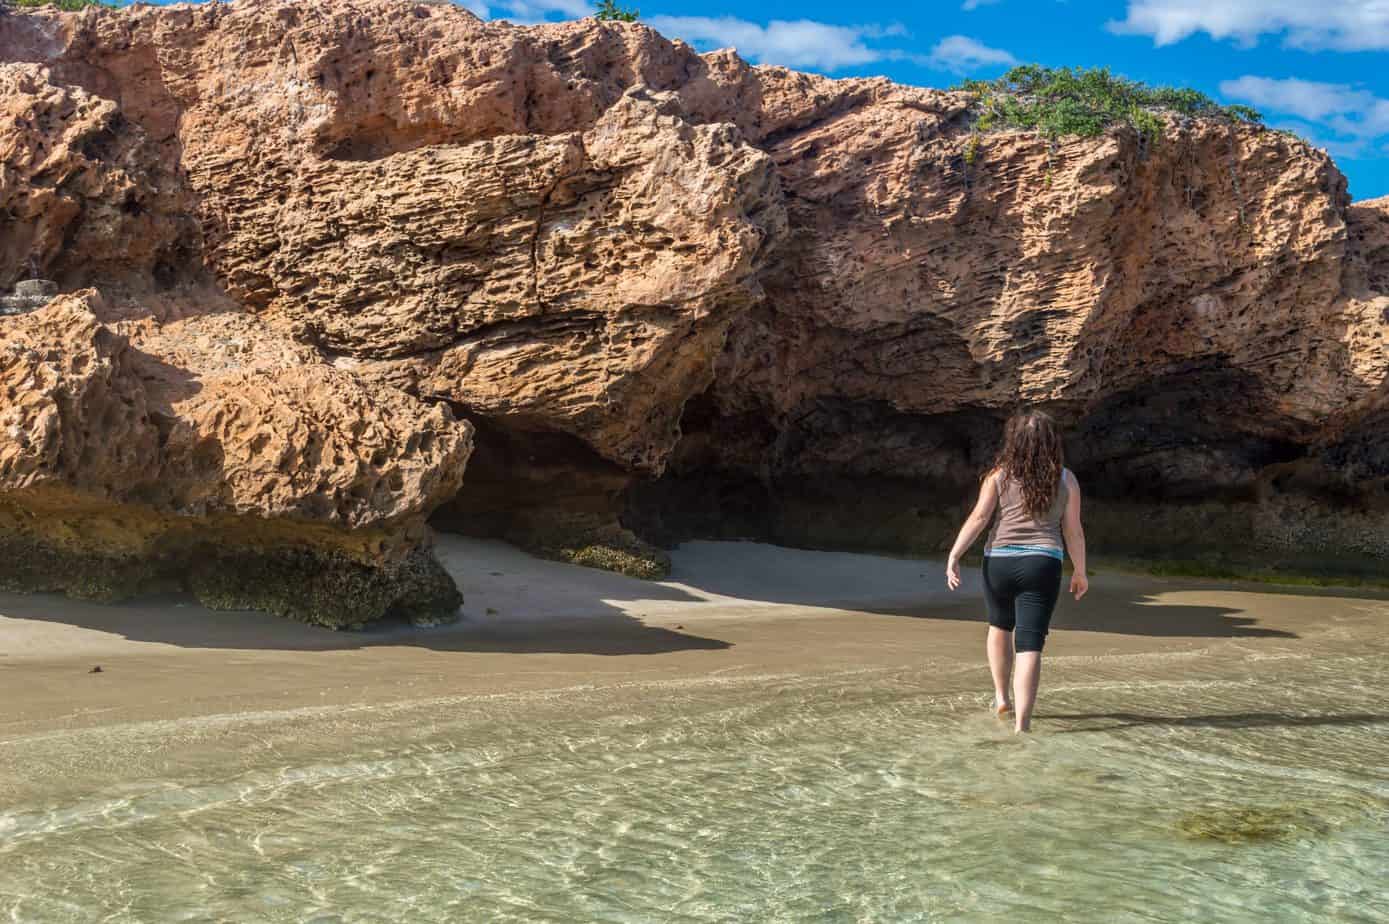 A woman walks in shallow ocean water next to a rocky cliff